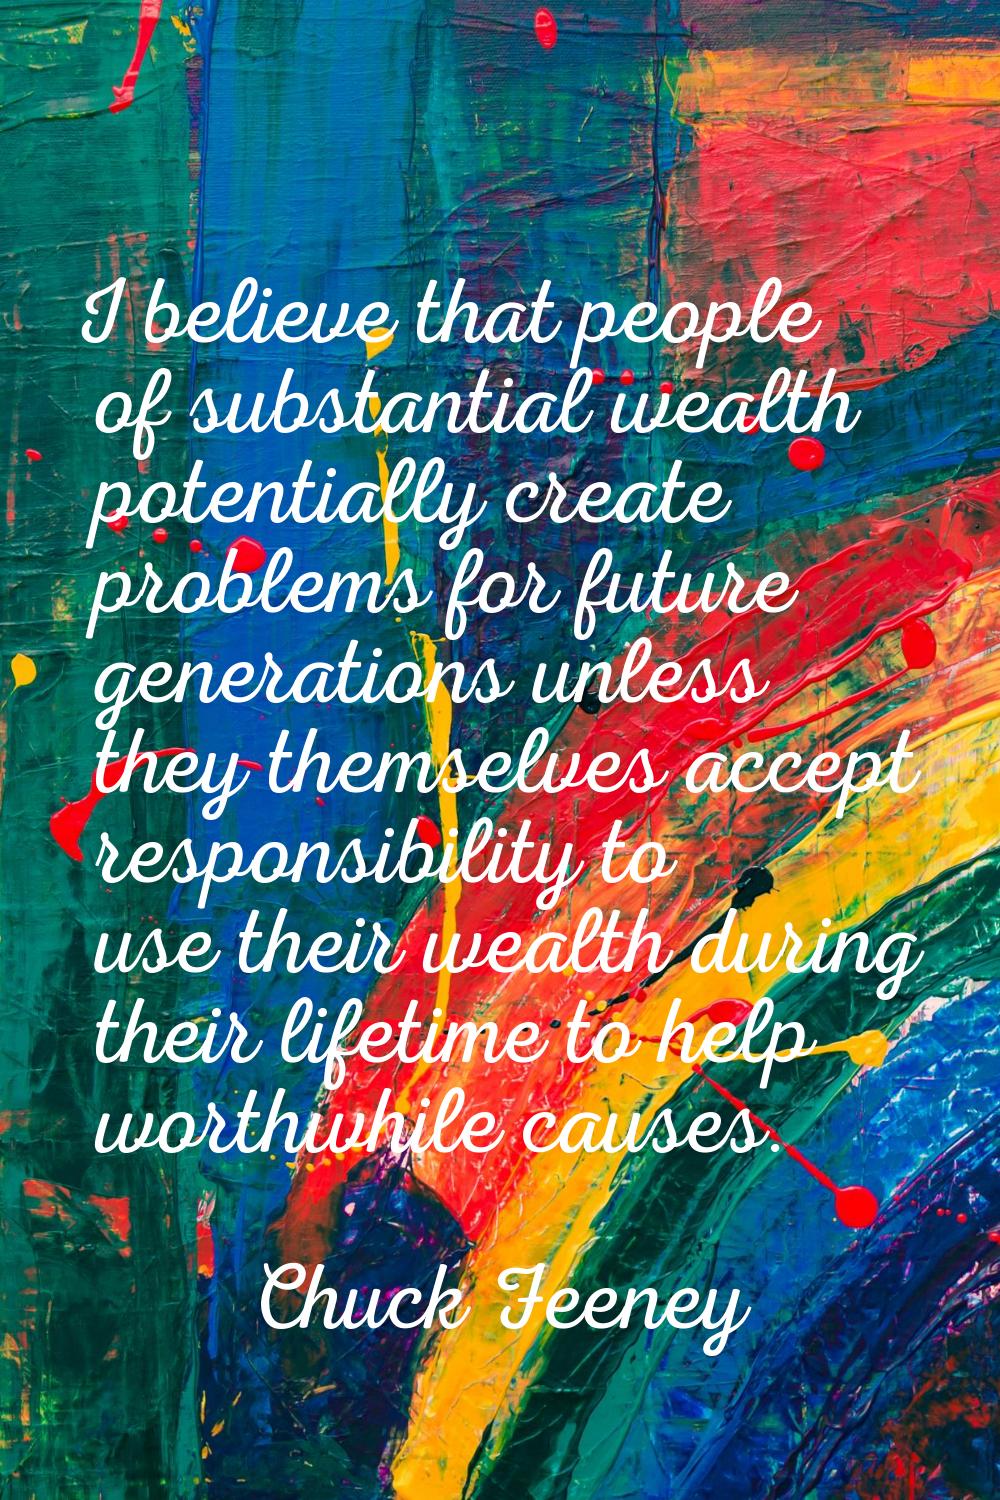 I believe that people of substantial wealth potentially create problems for future generations unle